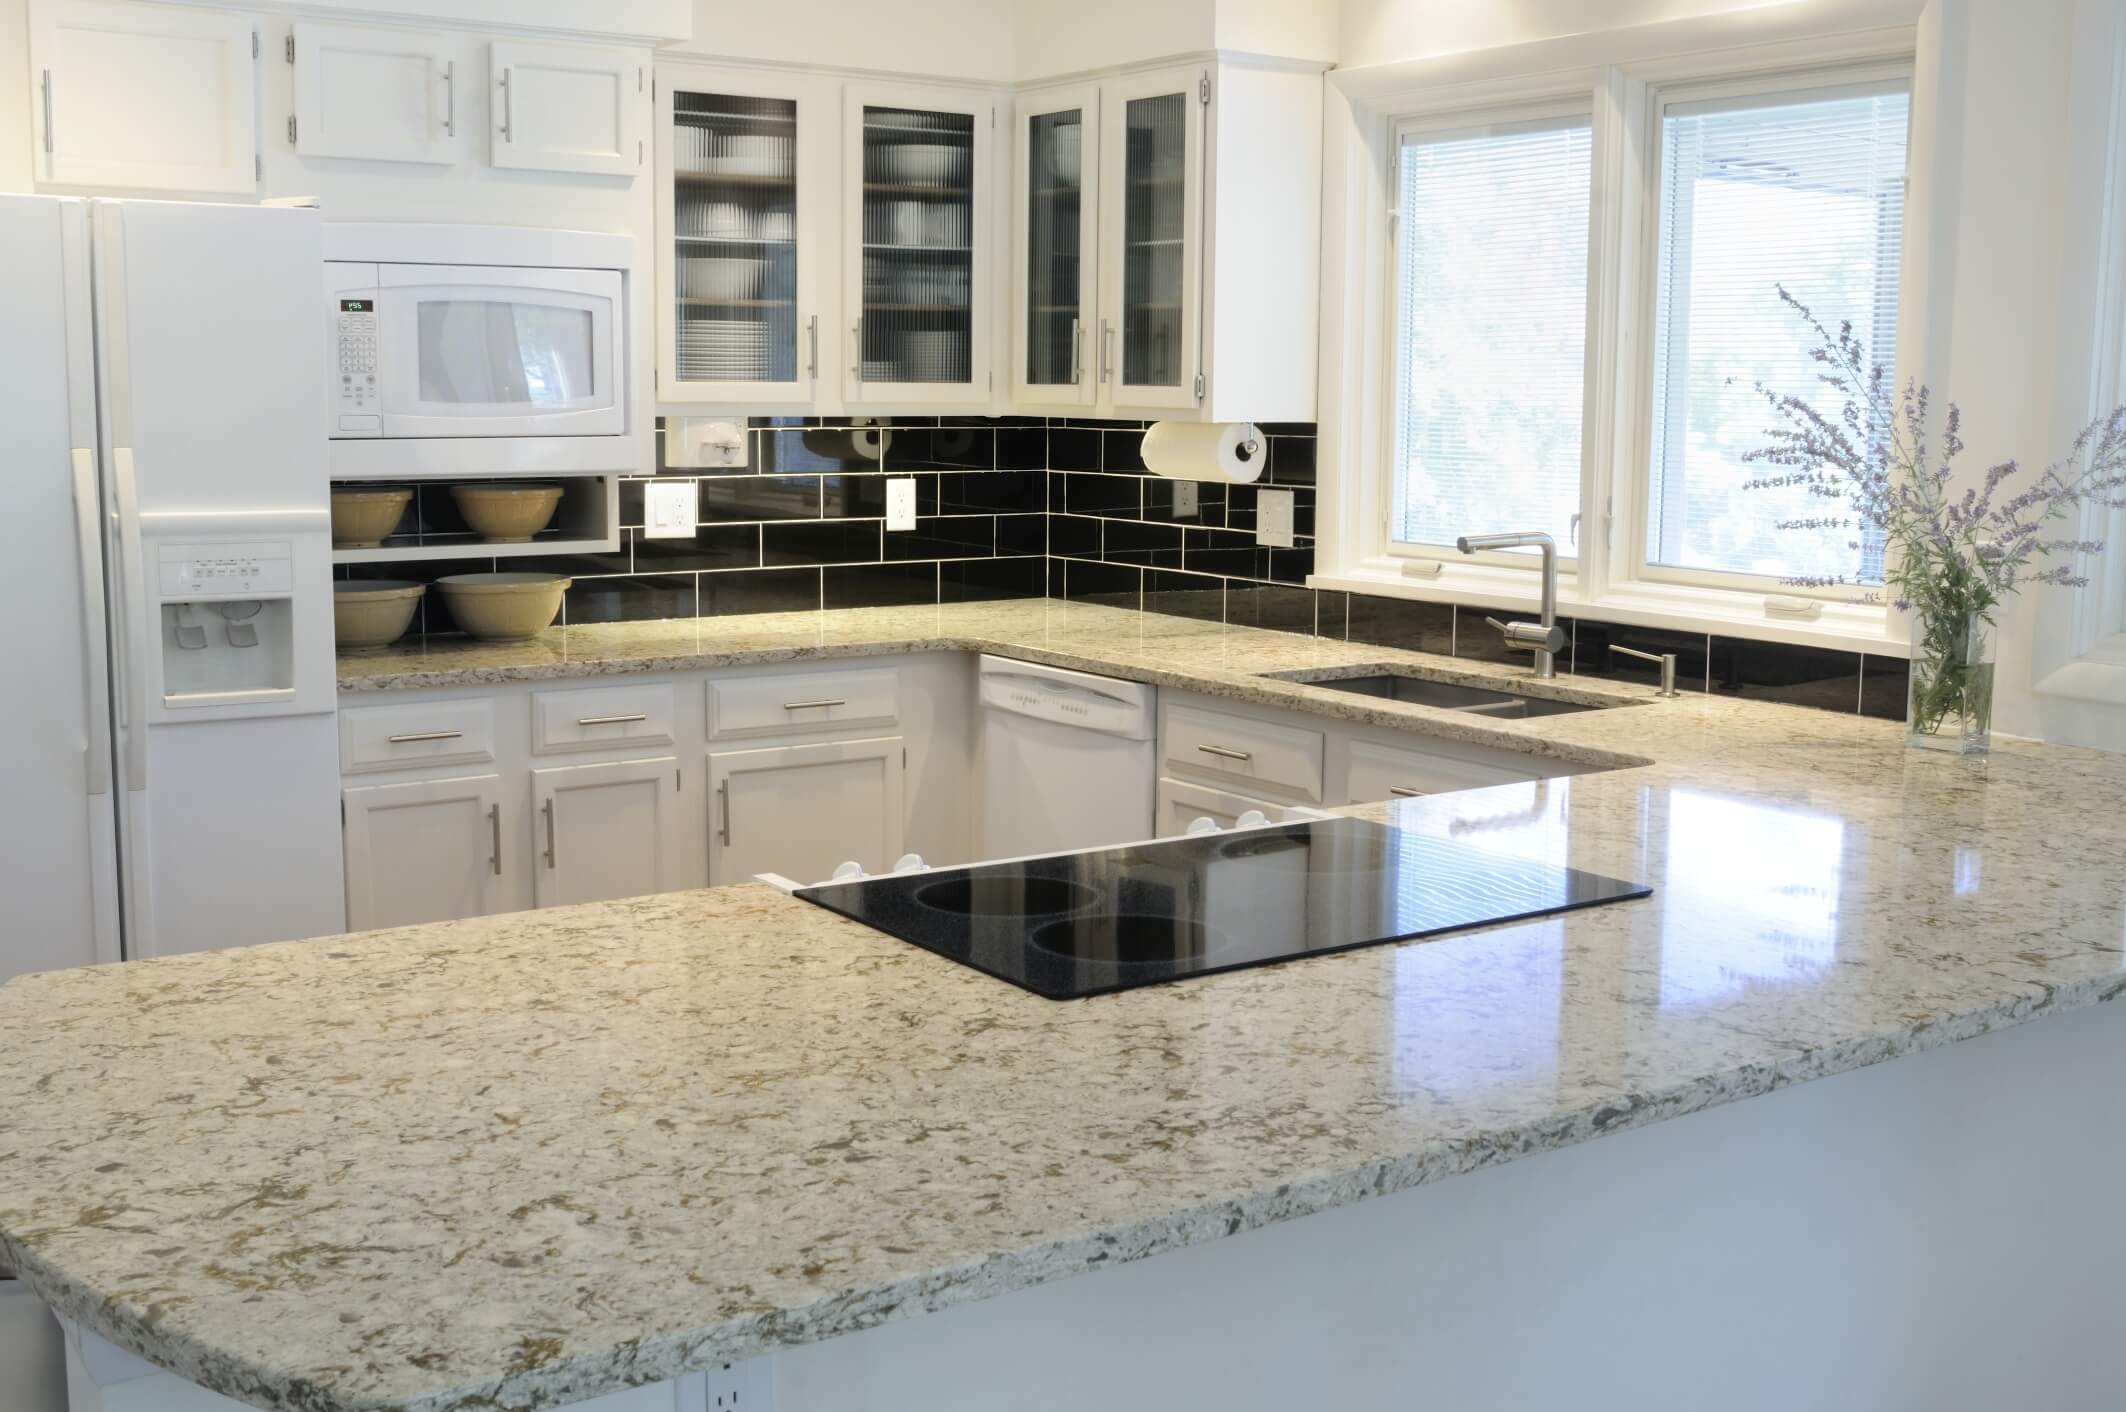 Kitchen Remodeling Ideas for Today’s Home: 7 Benefits of Granite